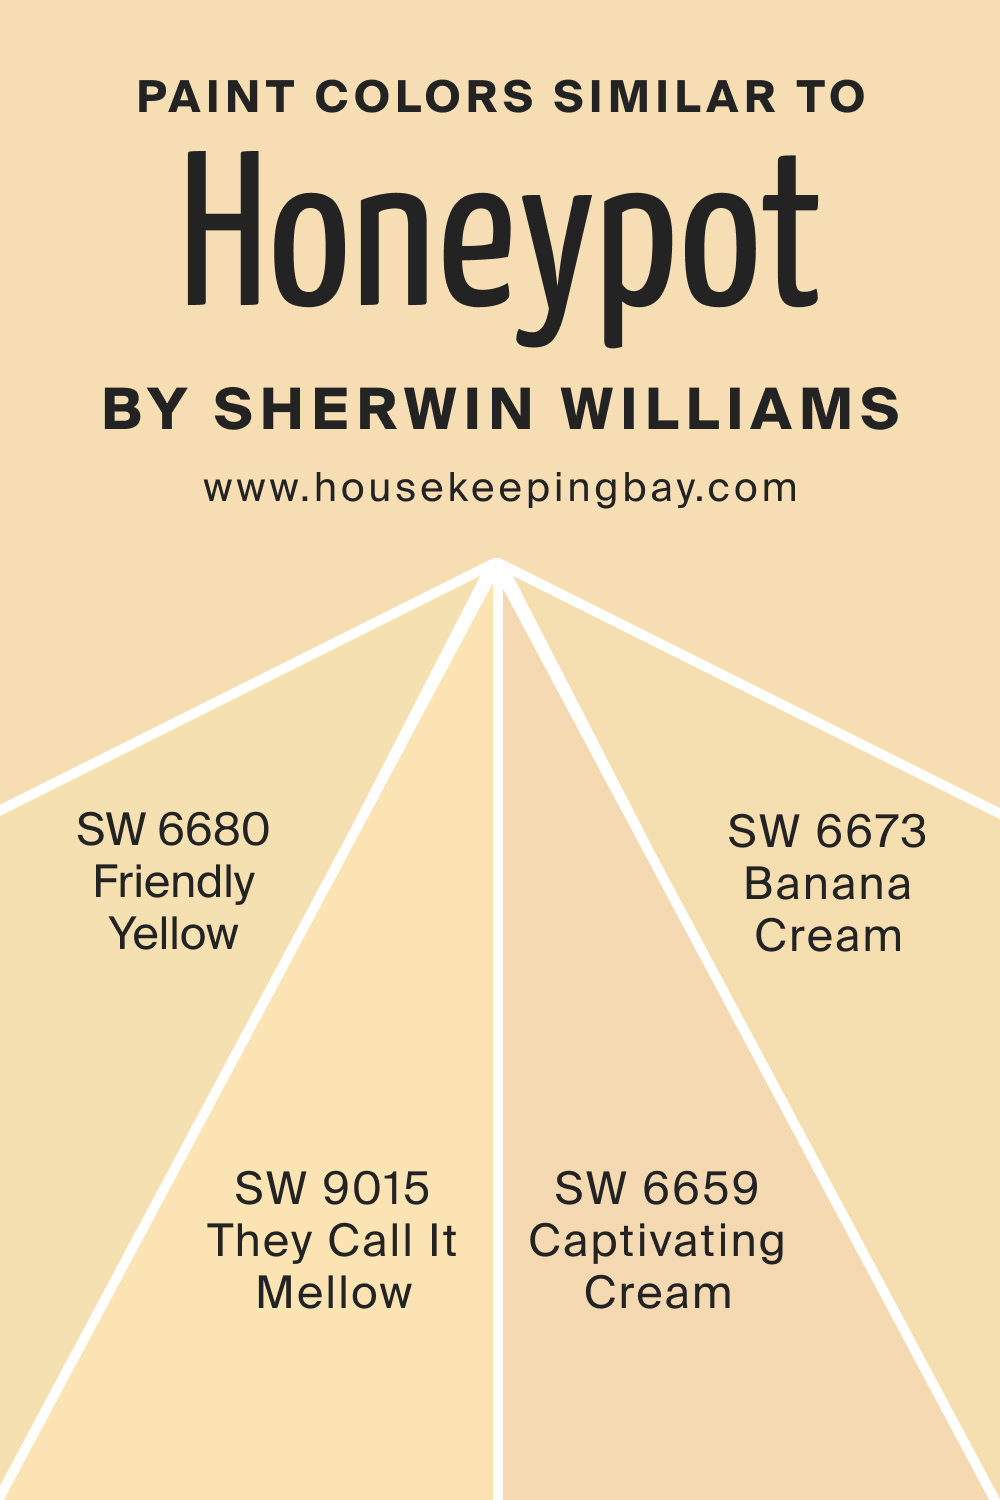 Paint Color Similar to SW 9663 Honeypot by Sherwin Williams